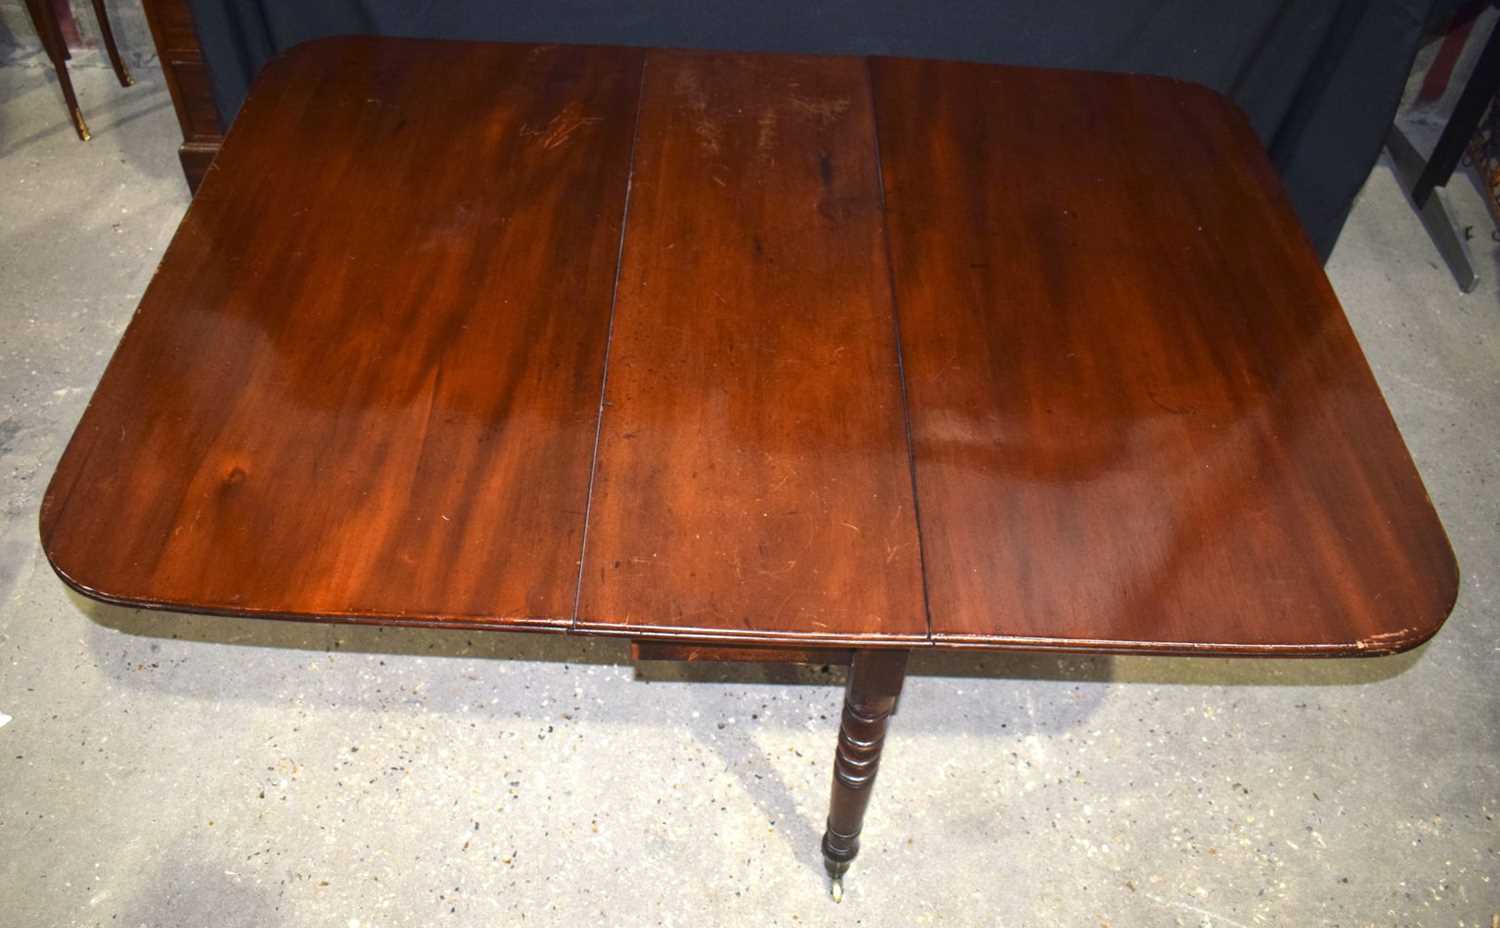 An antique mahogany drop leaf dining table 71 x 145 x 104 cm. - Image 3 of 10